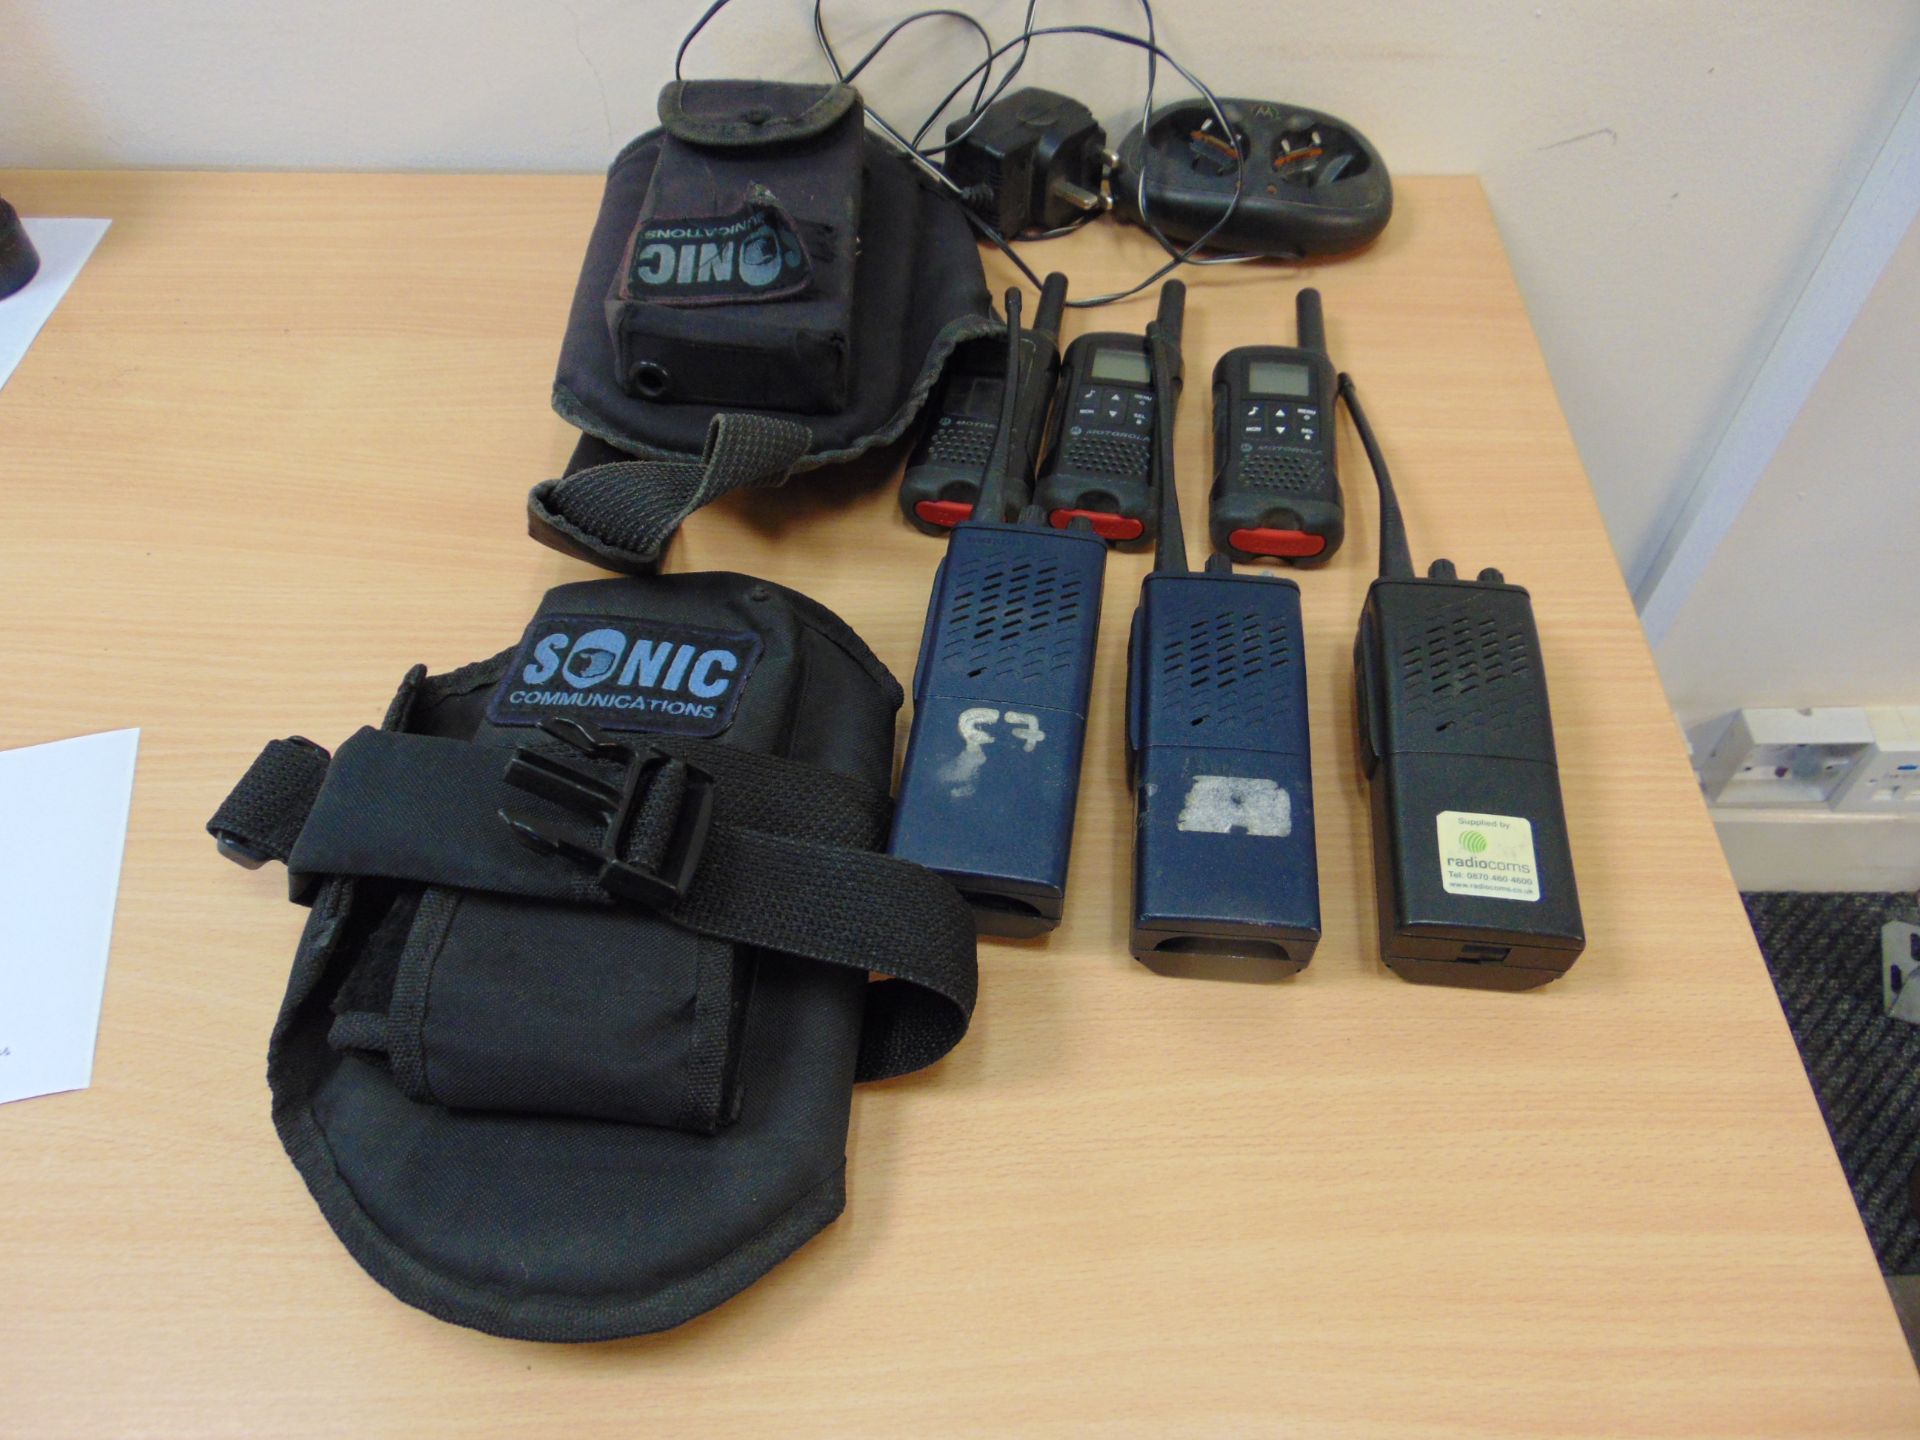 6 x HAND HELD RADIOS, CHARGER & 2 x CARRYING POUCHES